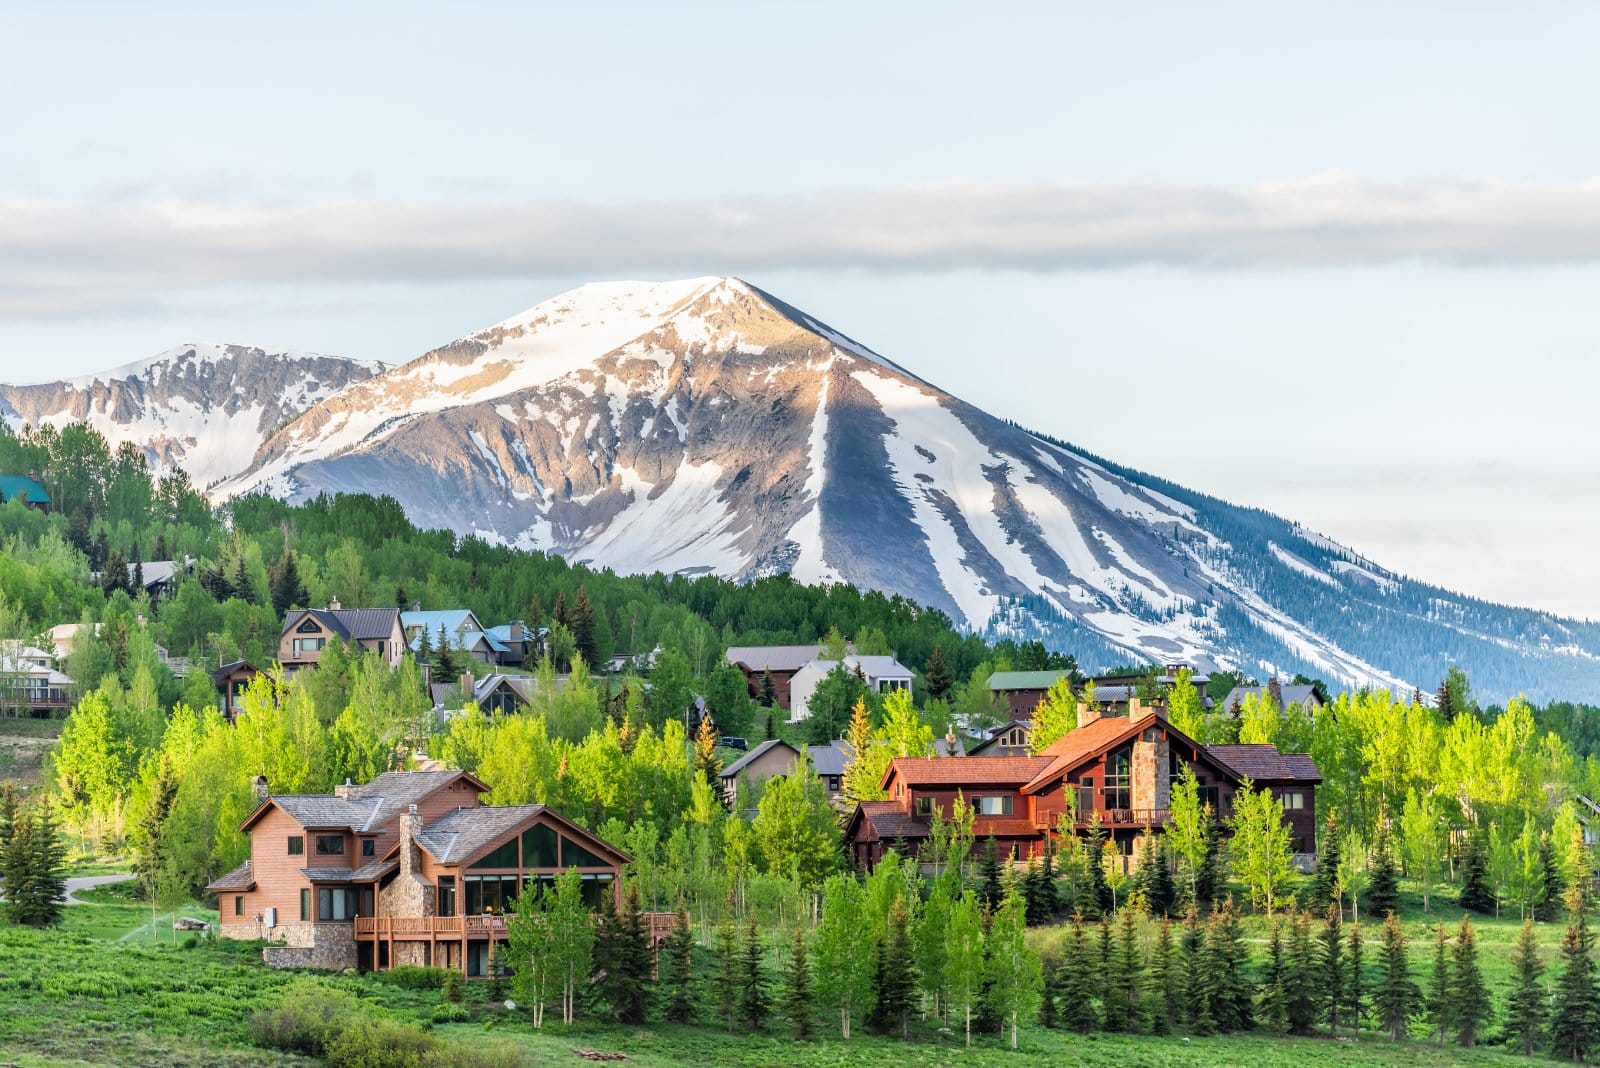 <p class="wp-caption-text">Image Credit: Shutterstock / Kristi Blokhin</p>  <p><span>Rent a bike for around $50 and pedal through the thawing beauty of Crested Butte, often hailed as the wildflower capital, offering picturesque trails perfect for spring.</span></p>